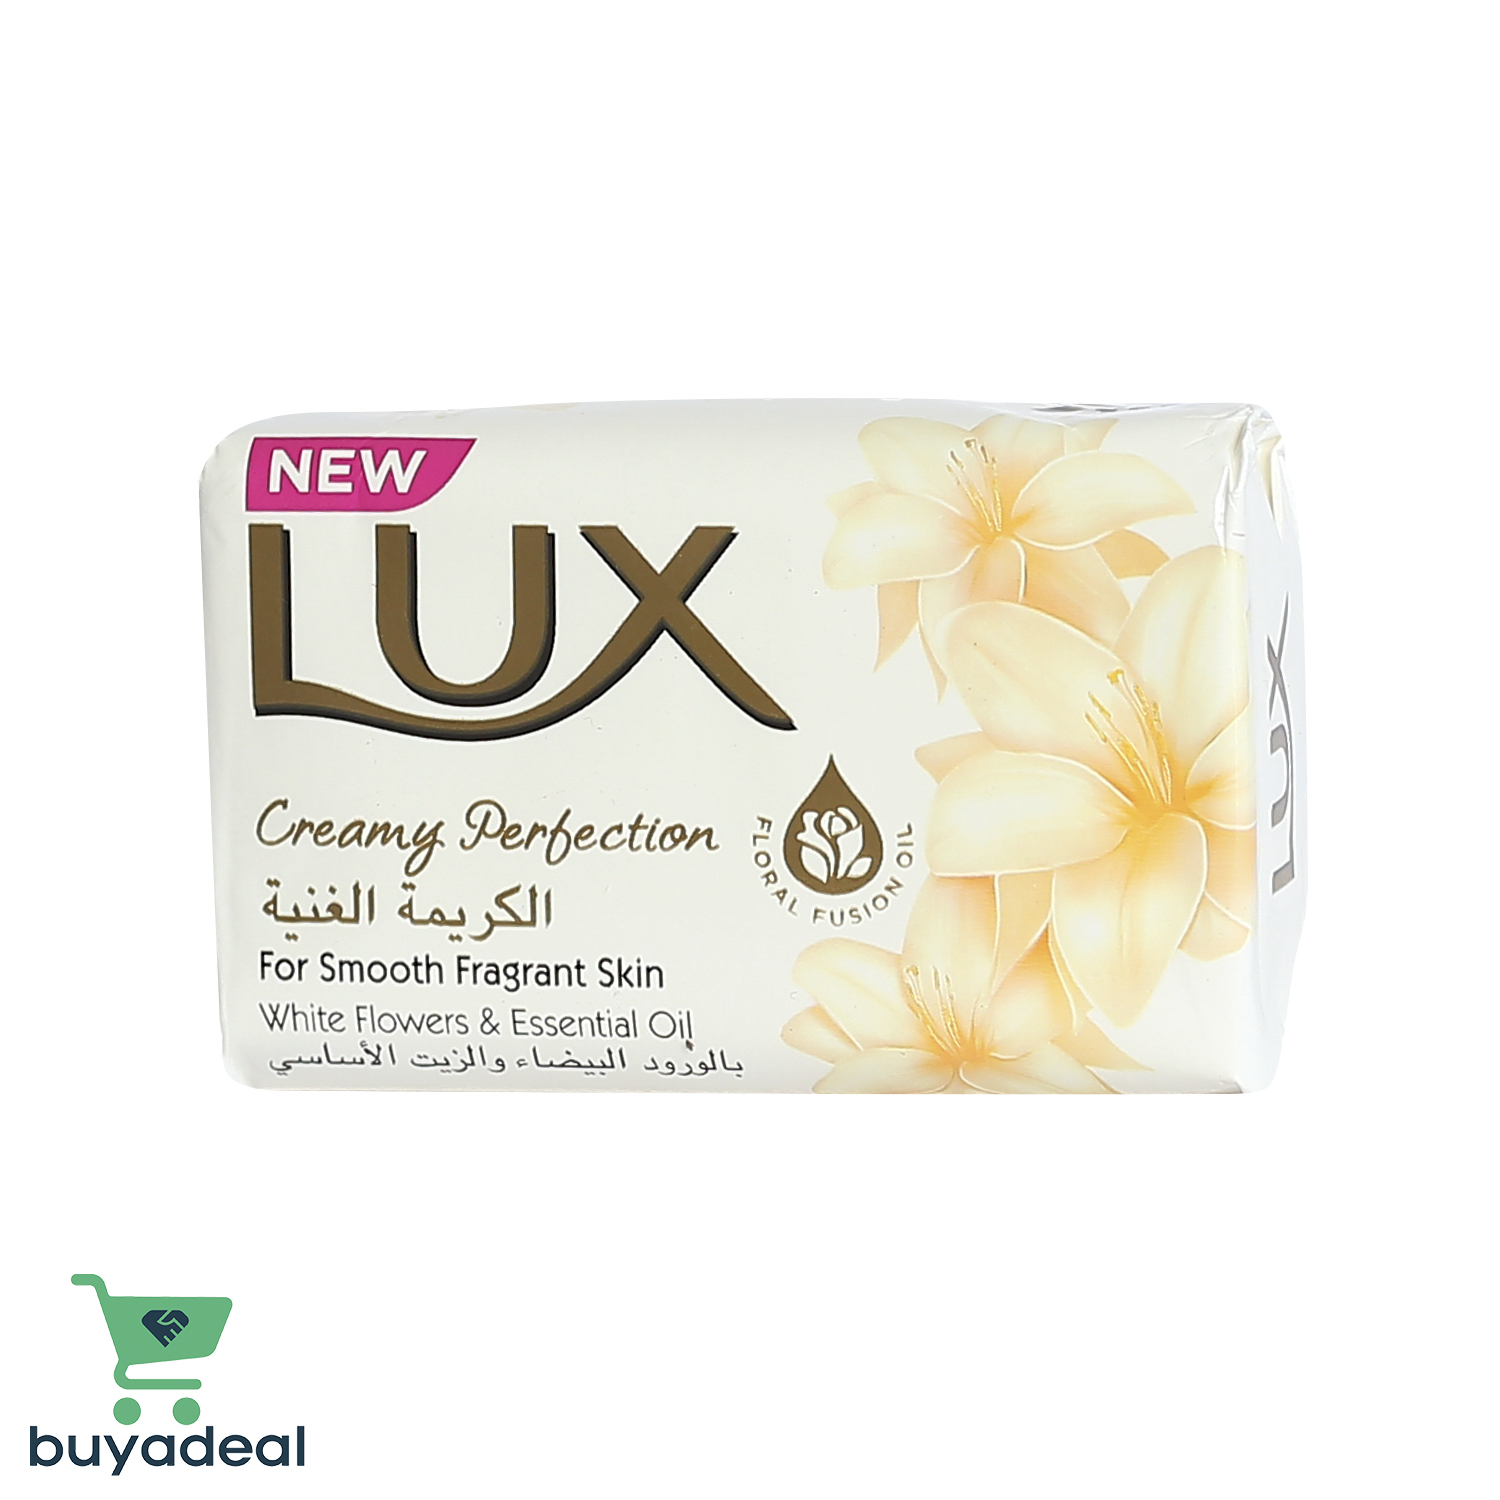 Buyadeal Product Lux Creamy Perfection Flawless Lily Bar Soap  120 g